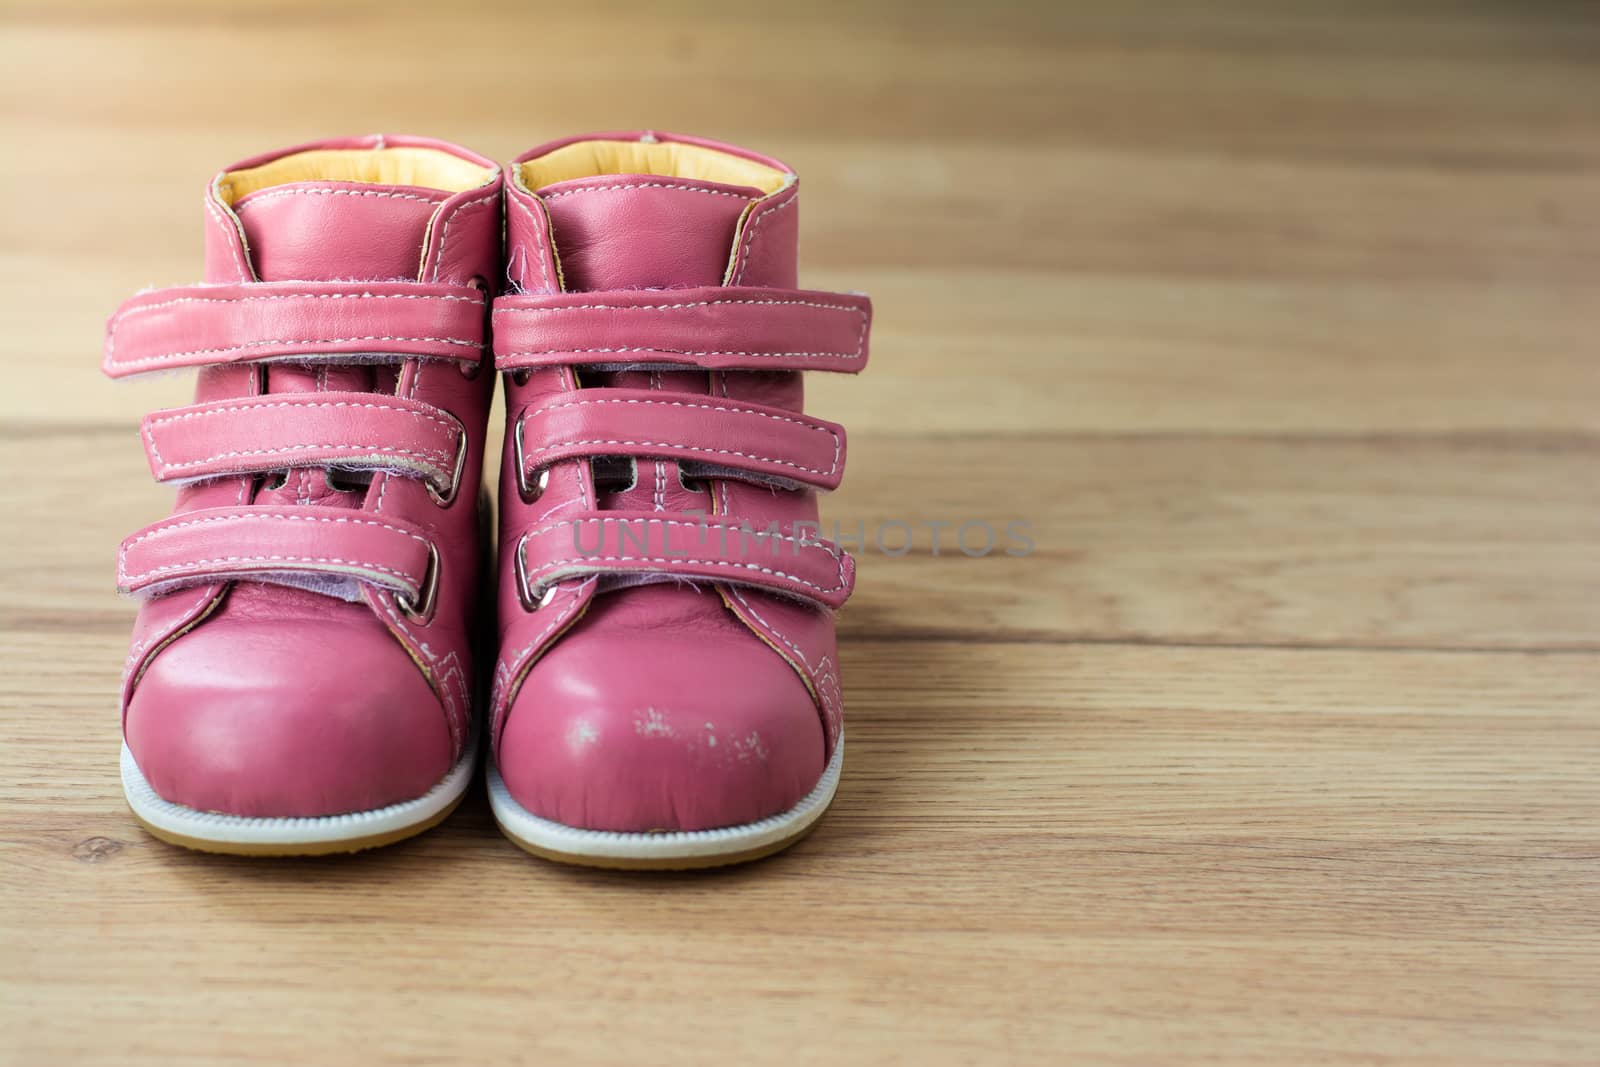 Pink Kids Shoes on wood background,Children's leather boots